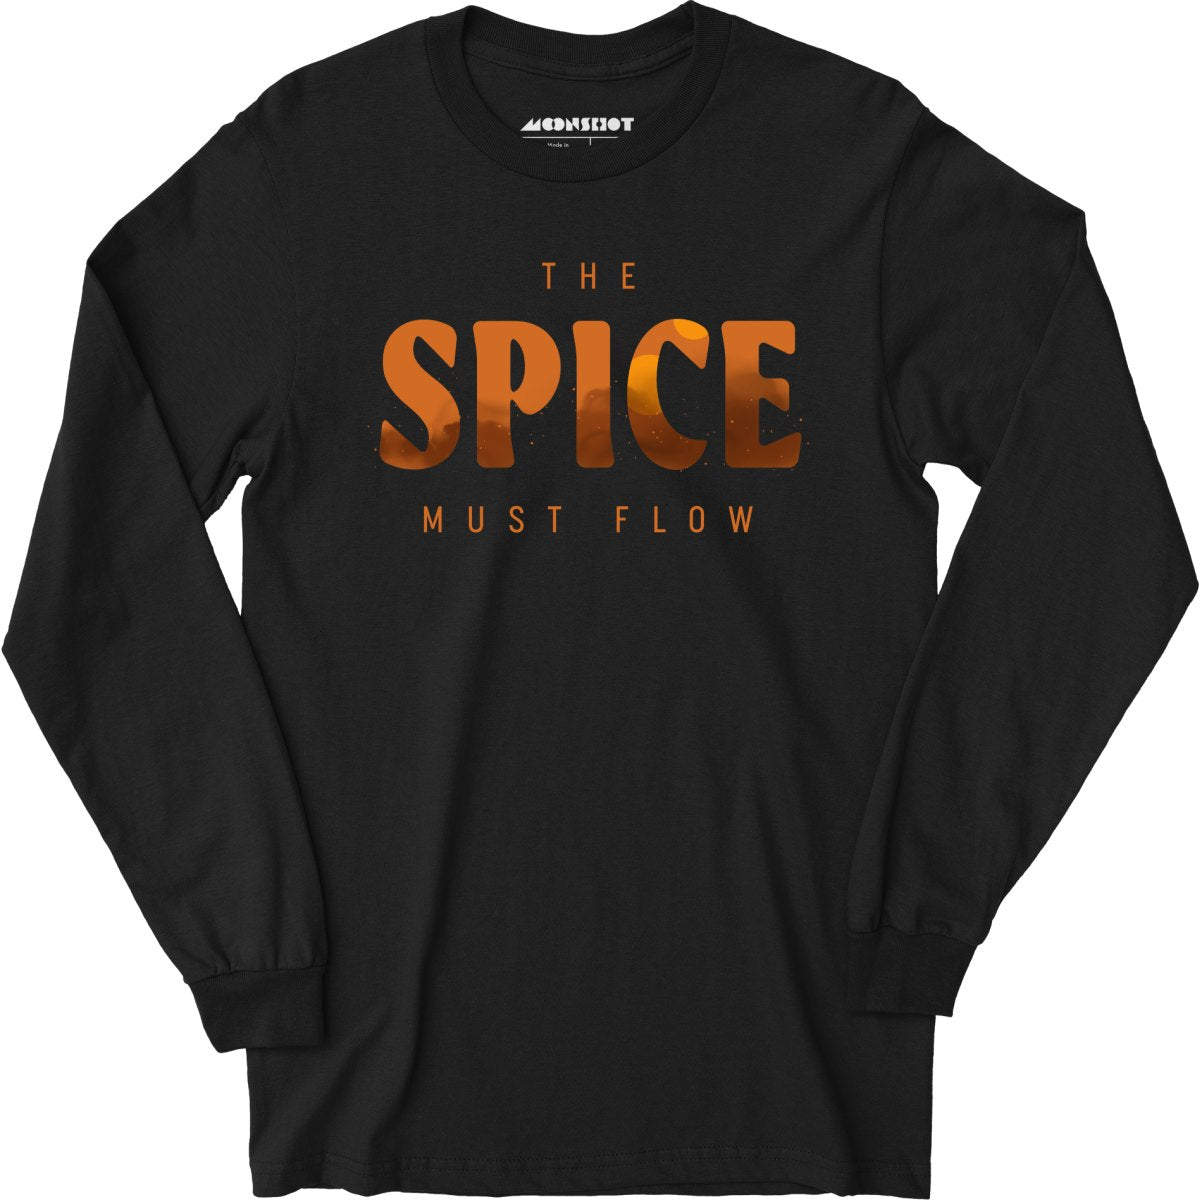 The Spice Must Flow - Long Sleeve T-Shirt